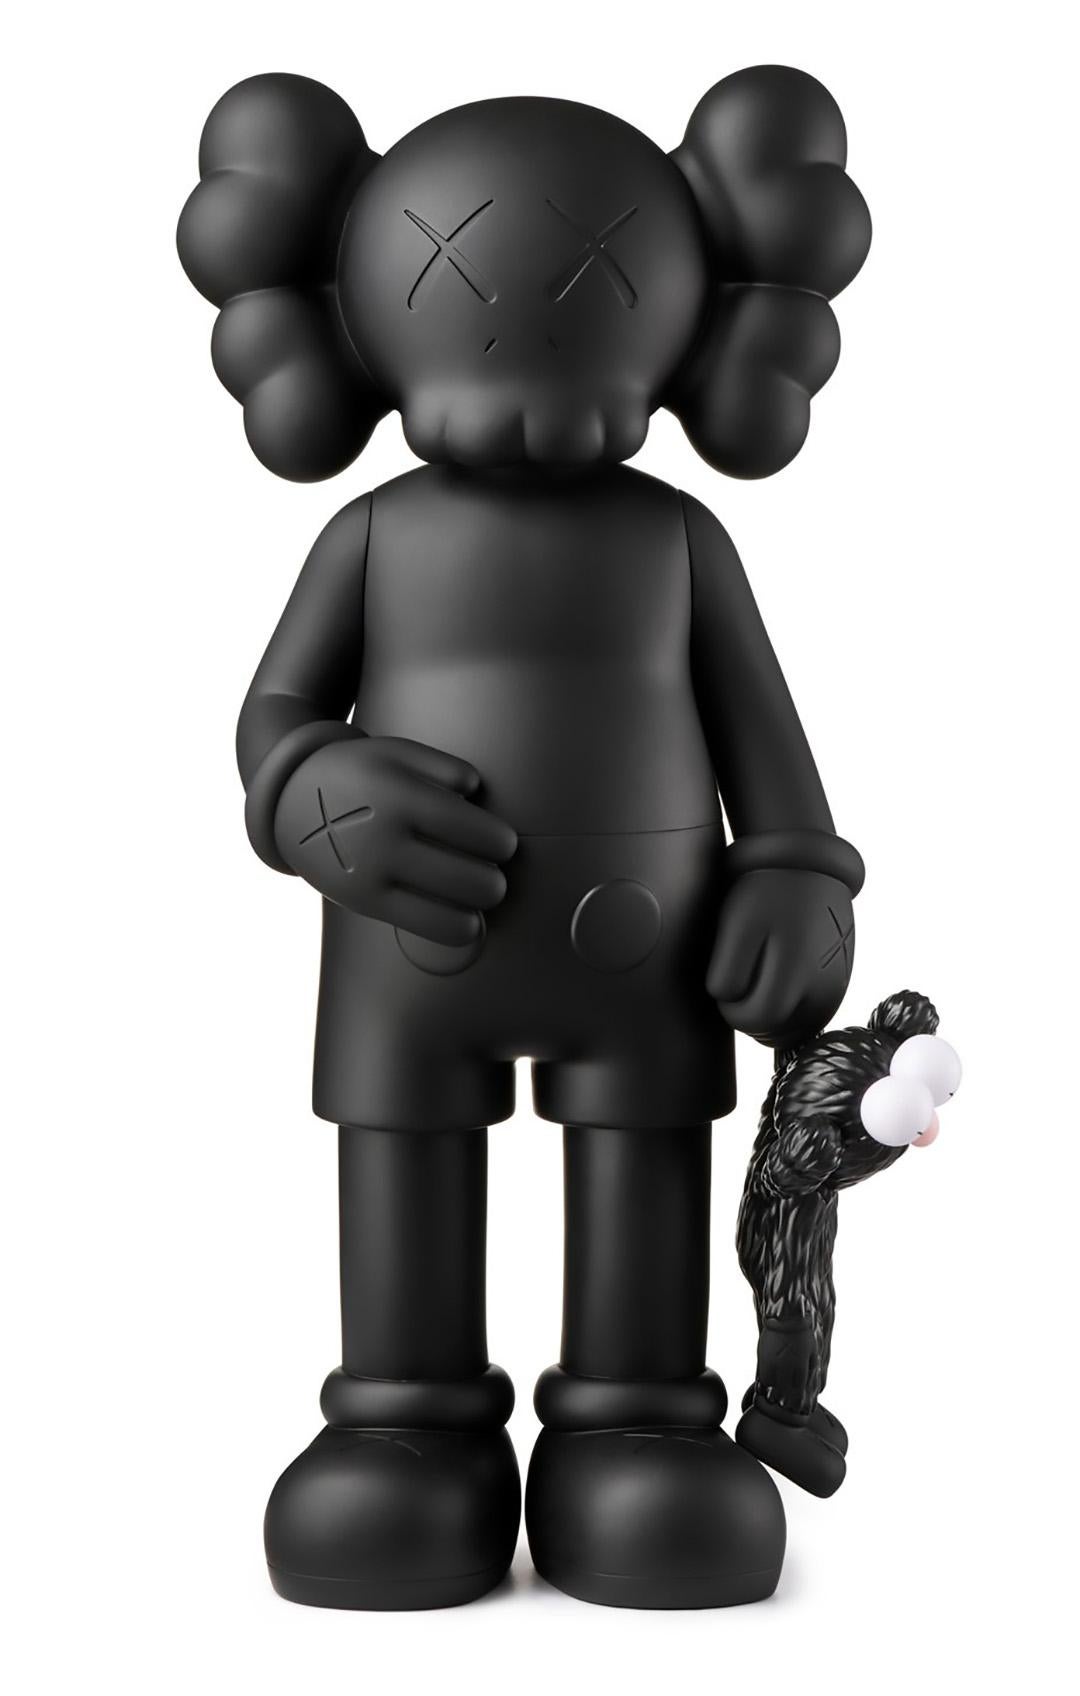 KAWS SHARE: Set of 2 ( Black & Grey); each new & unopened in its original packaging. 

Medium: Painted Vinyl Cast Resin. 
12.4 x 6.3 inches (applies to each individual).
New, unopened in its original box; excellent condition.  
From a sold out